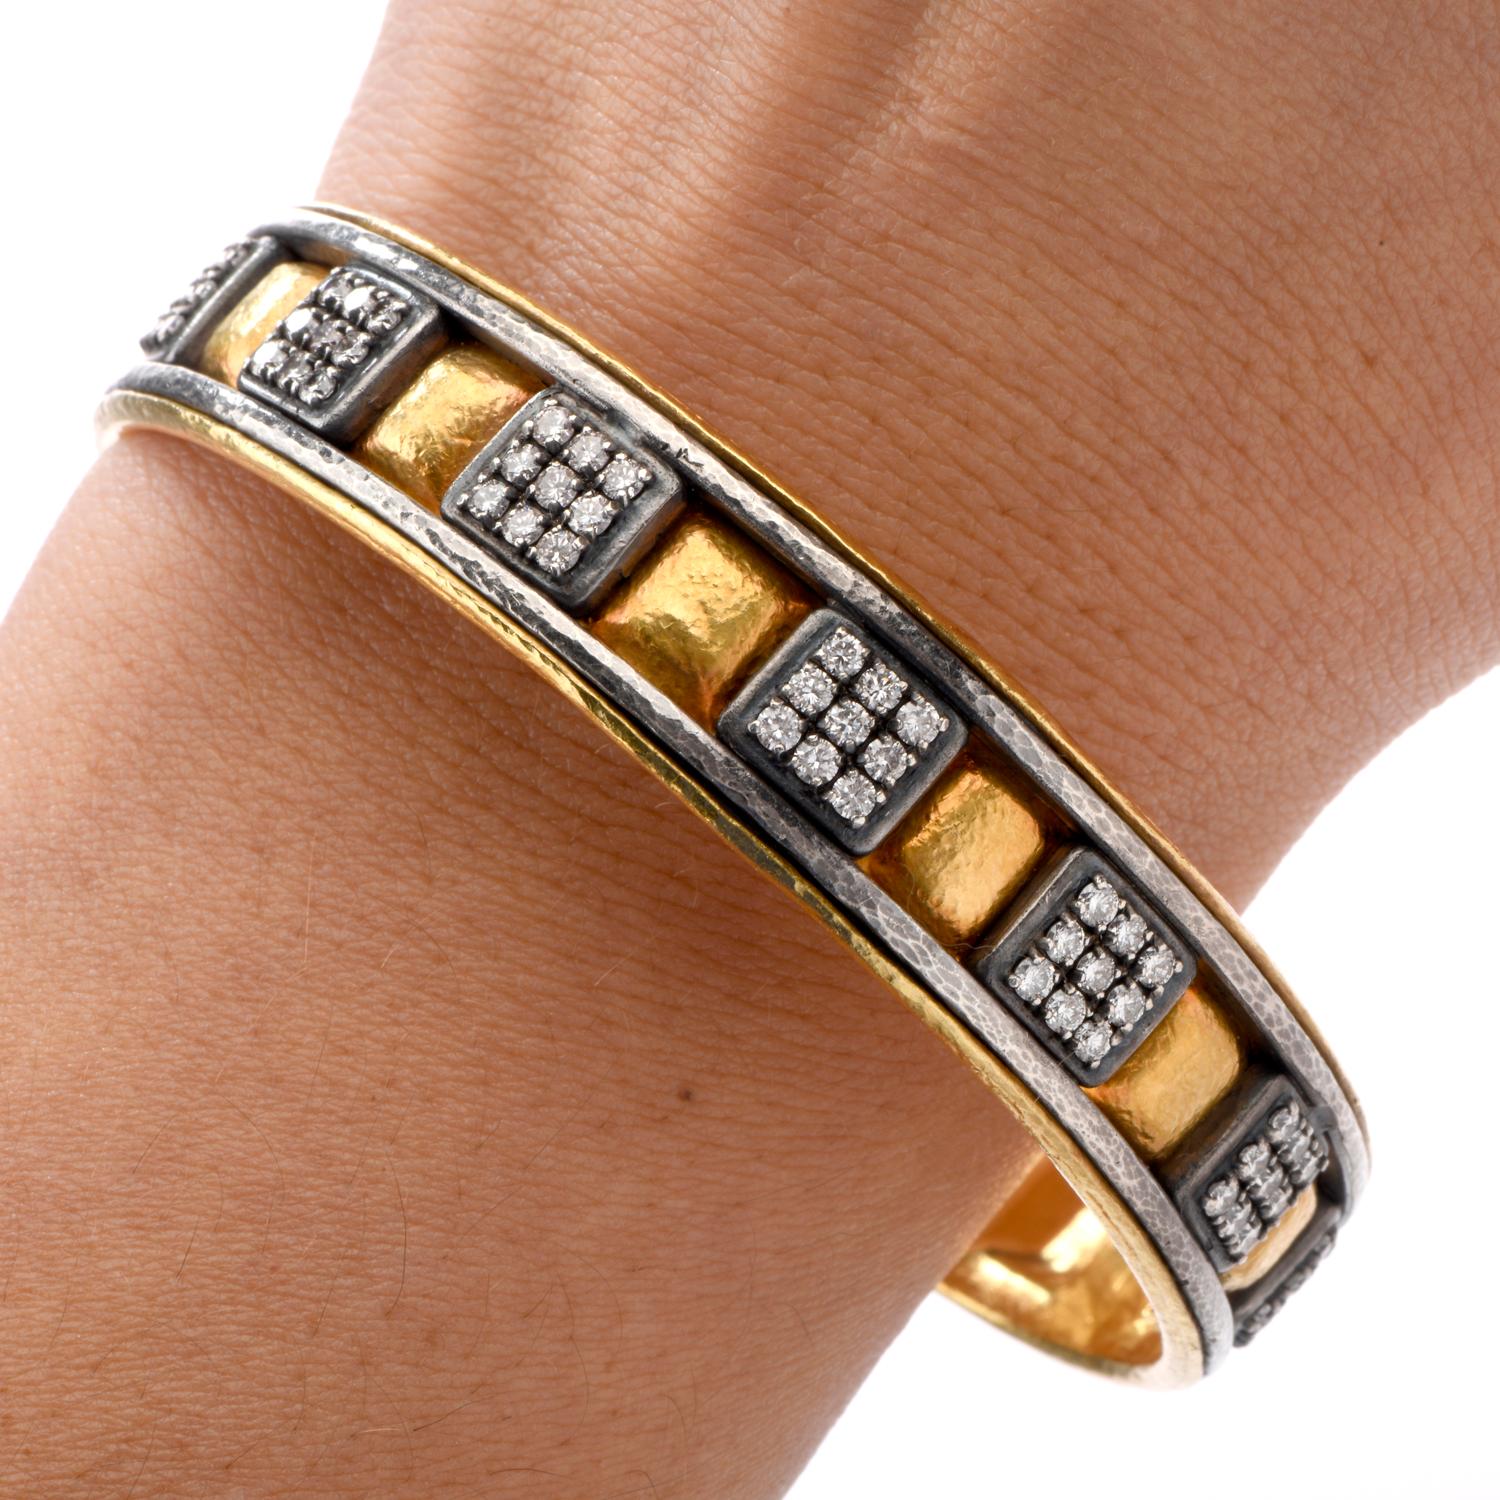 Incredible artistry by Gurhan that created this stunning hand made Diamond Bangle bracelet in solid 

24 karat pure gold with some silver.

Alternating squares of pure gold and diamond patterns adorn

the facade.  Each diamond pattern consists of 9